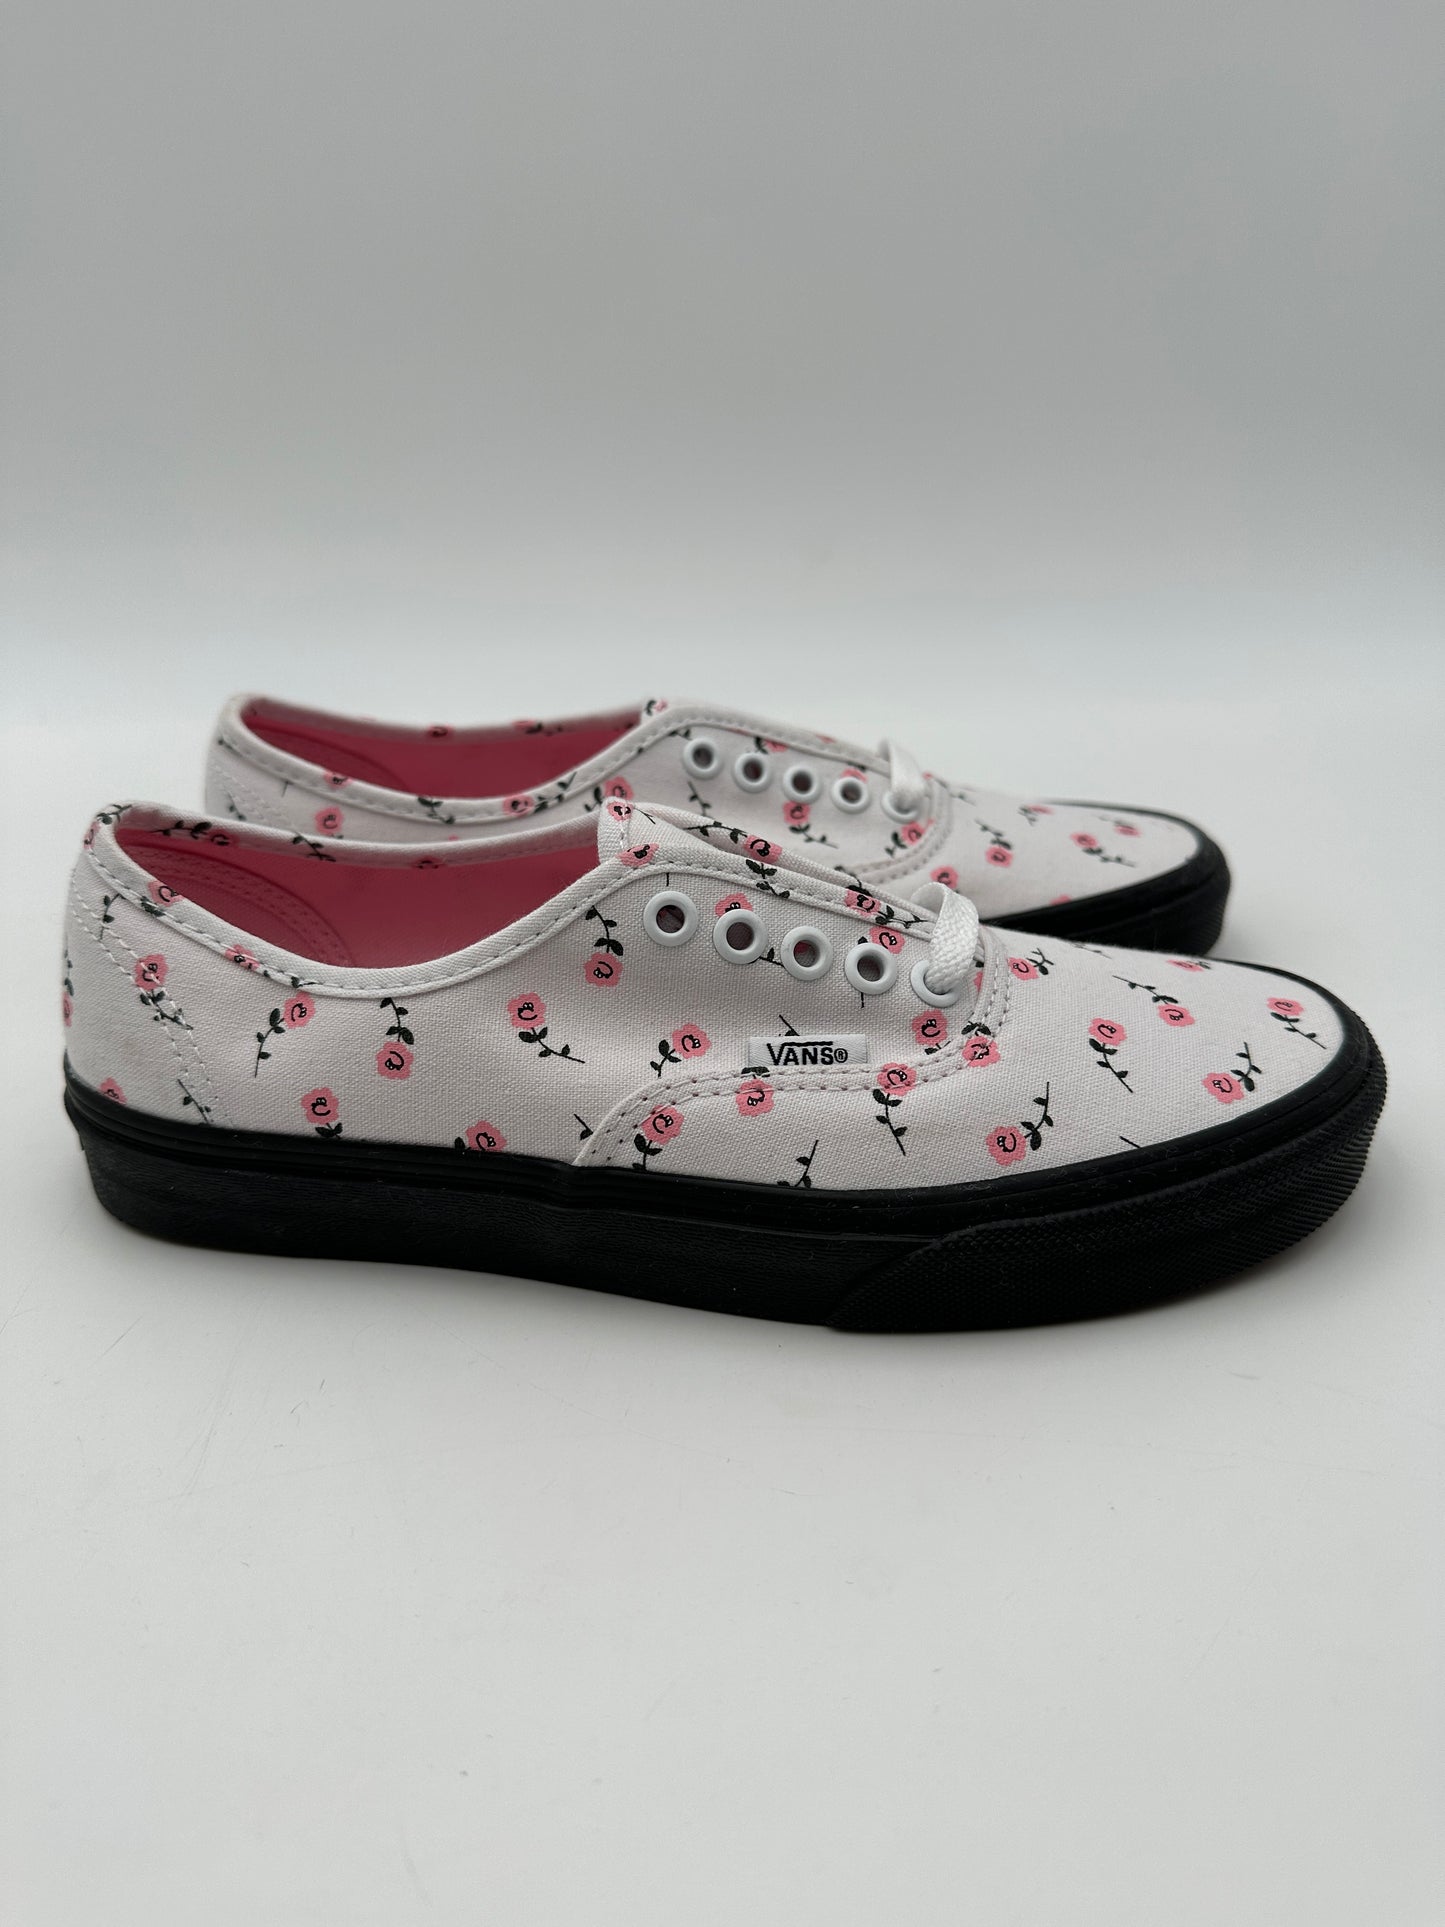 Vans x Lazy Oaf Authentic Women's Size 8 Black & White w/Pink Roses Sneakers Skate Shoes, NWOT